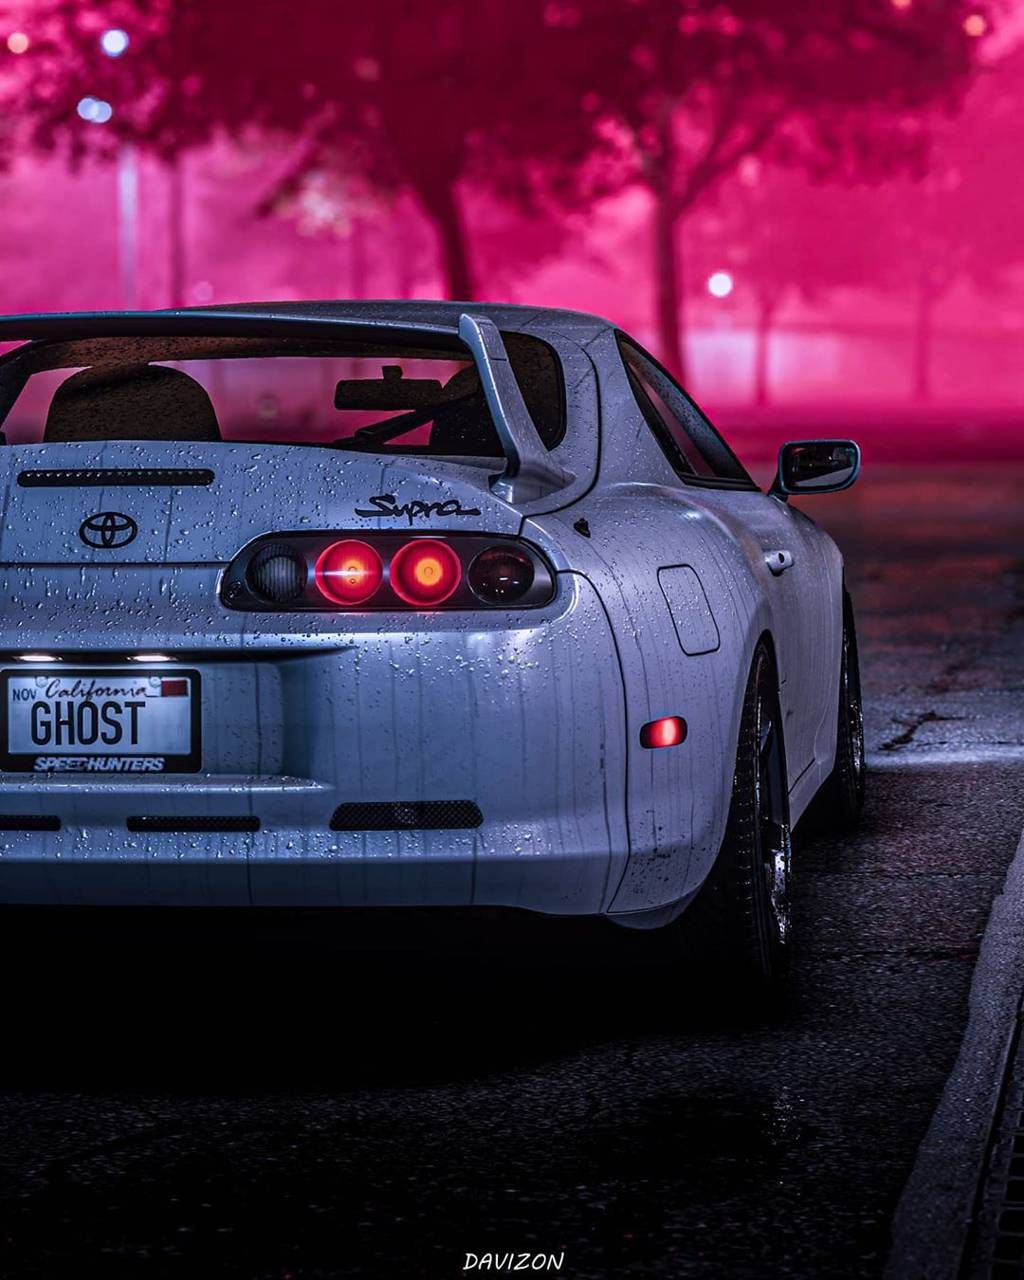 Download Supra wallpaper by PedroDavi27 now. Browse millions of popular forza Wallpaper and. Toyota supra mk Toyota supra, Best jdm cars